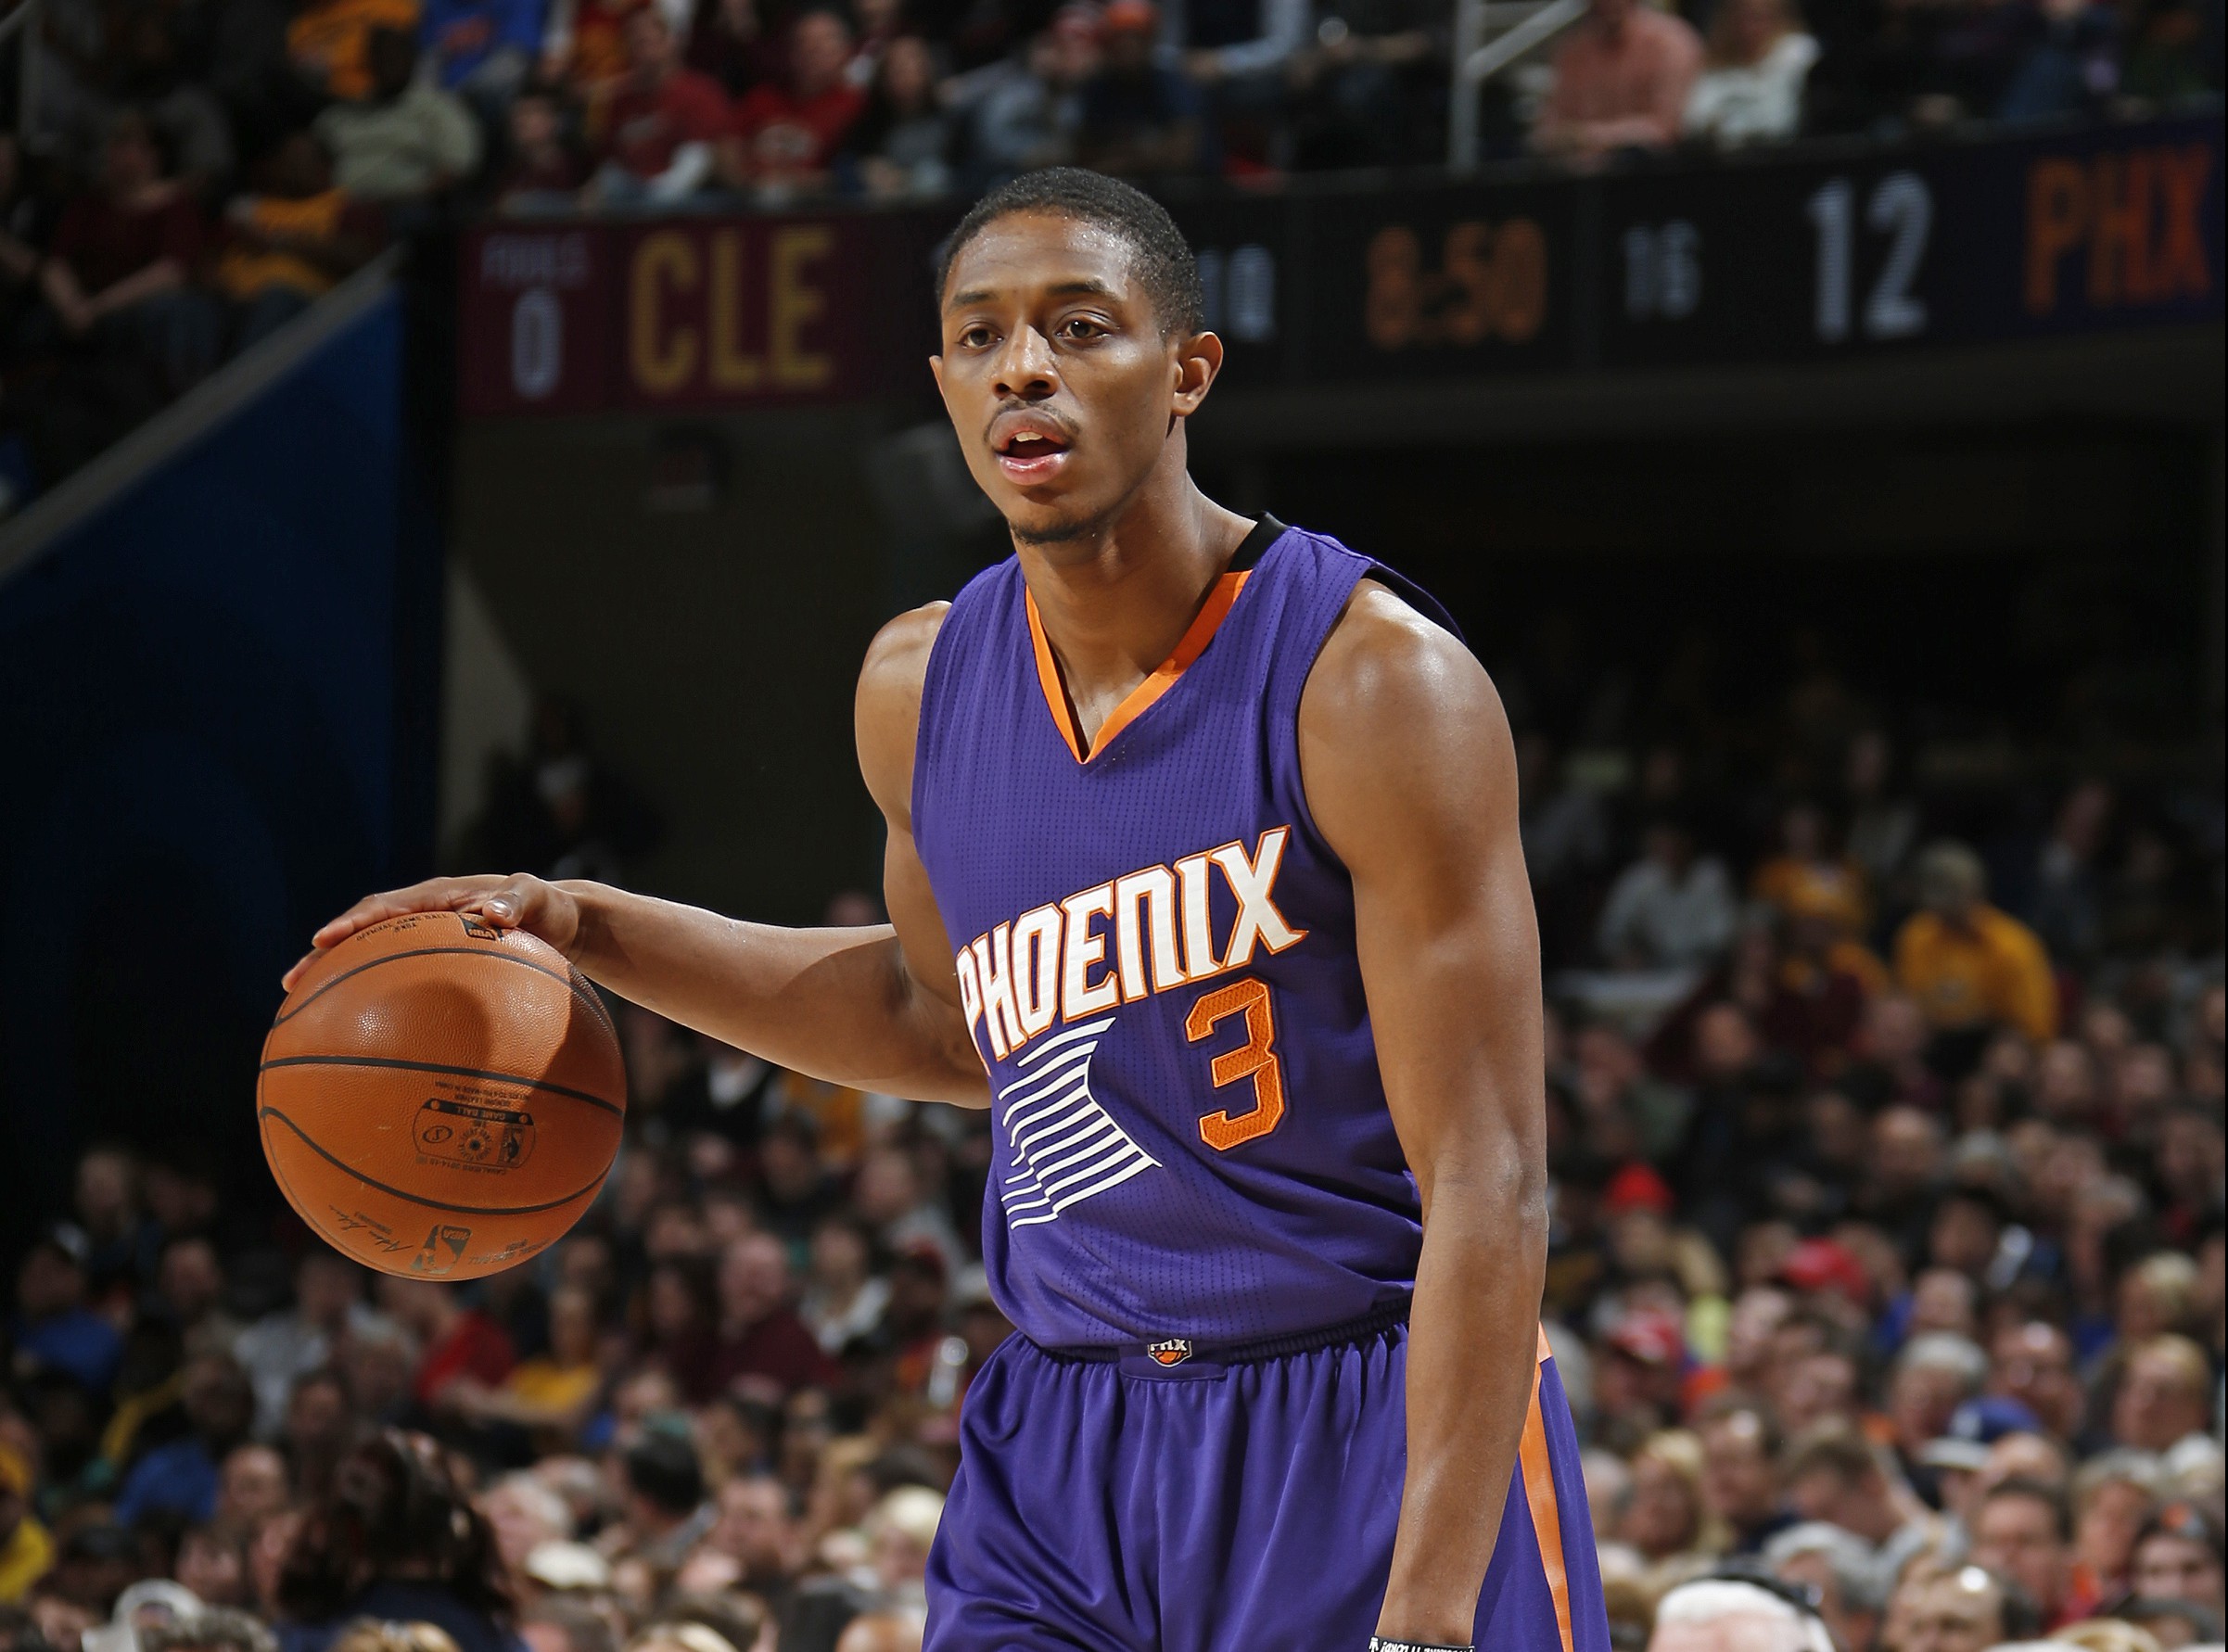 Report: Brandon Knight to Ink $70 Million Deal With Suns | SLAMonline